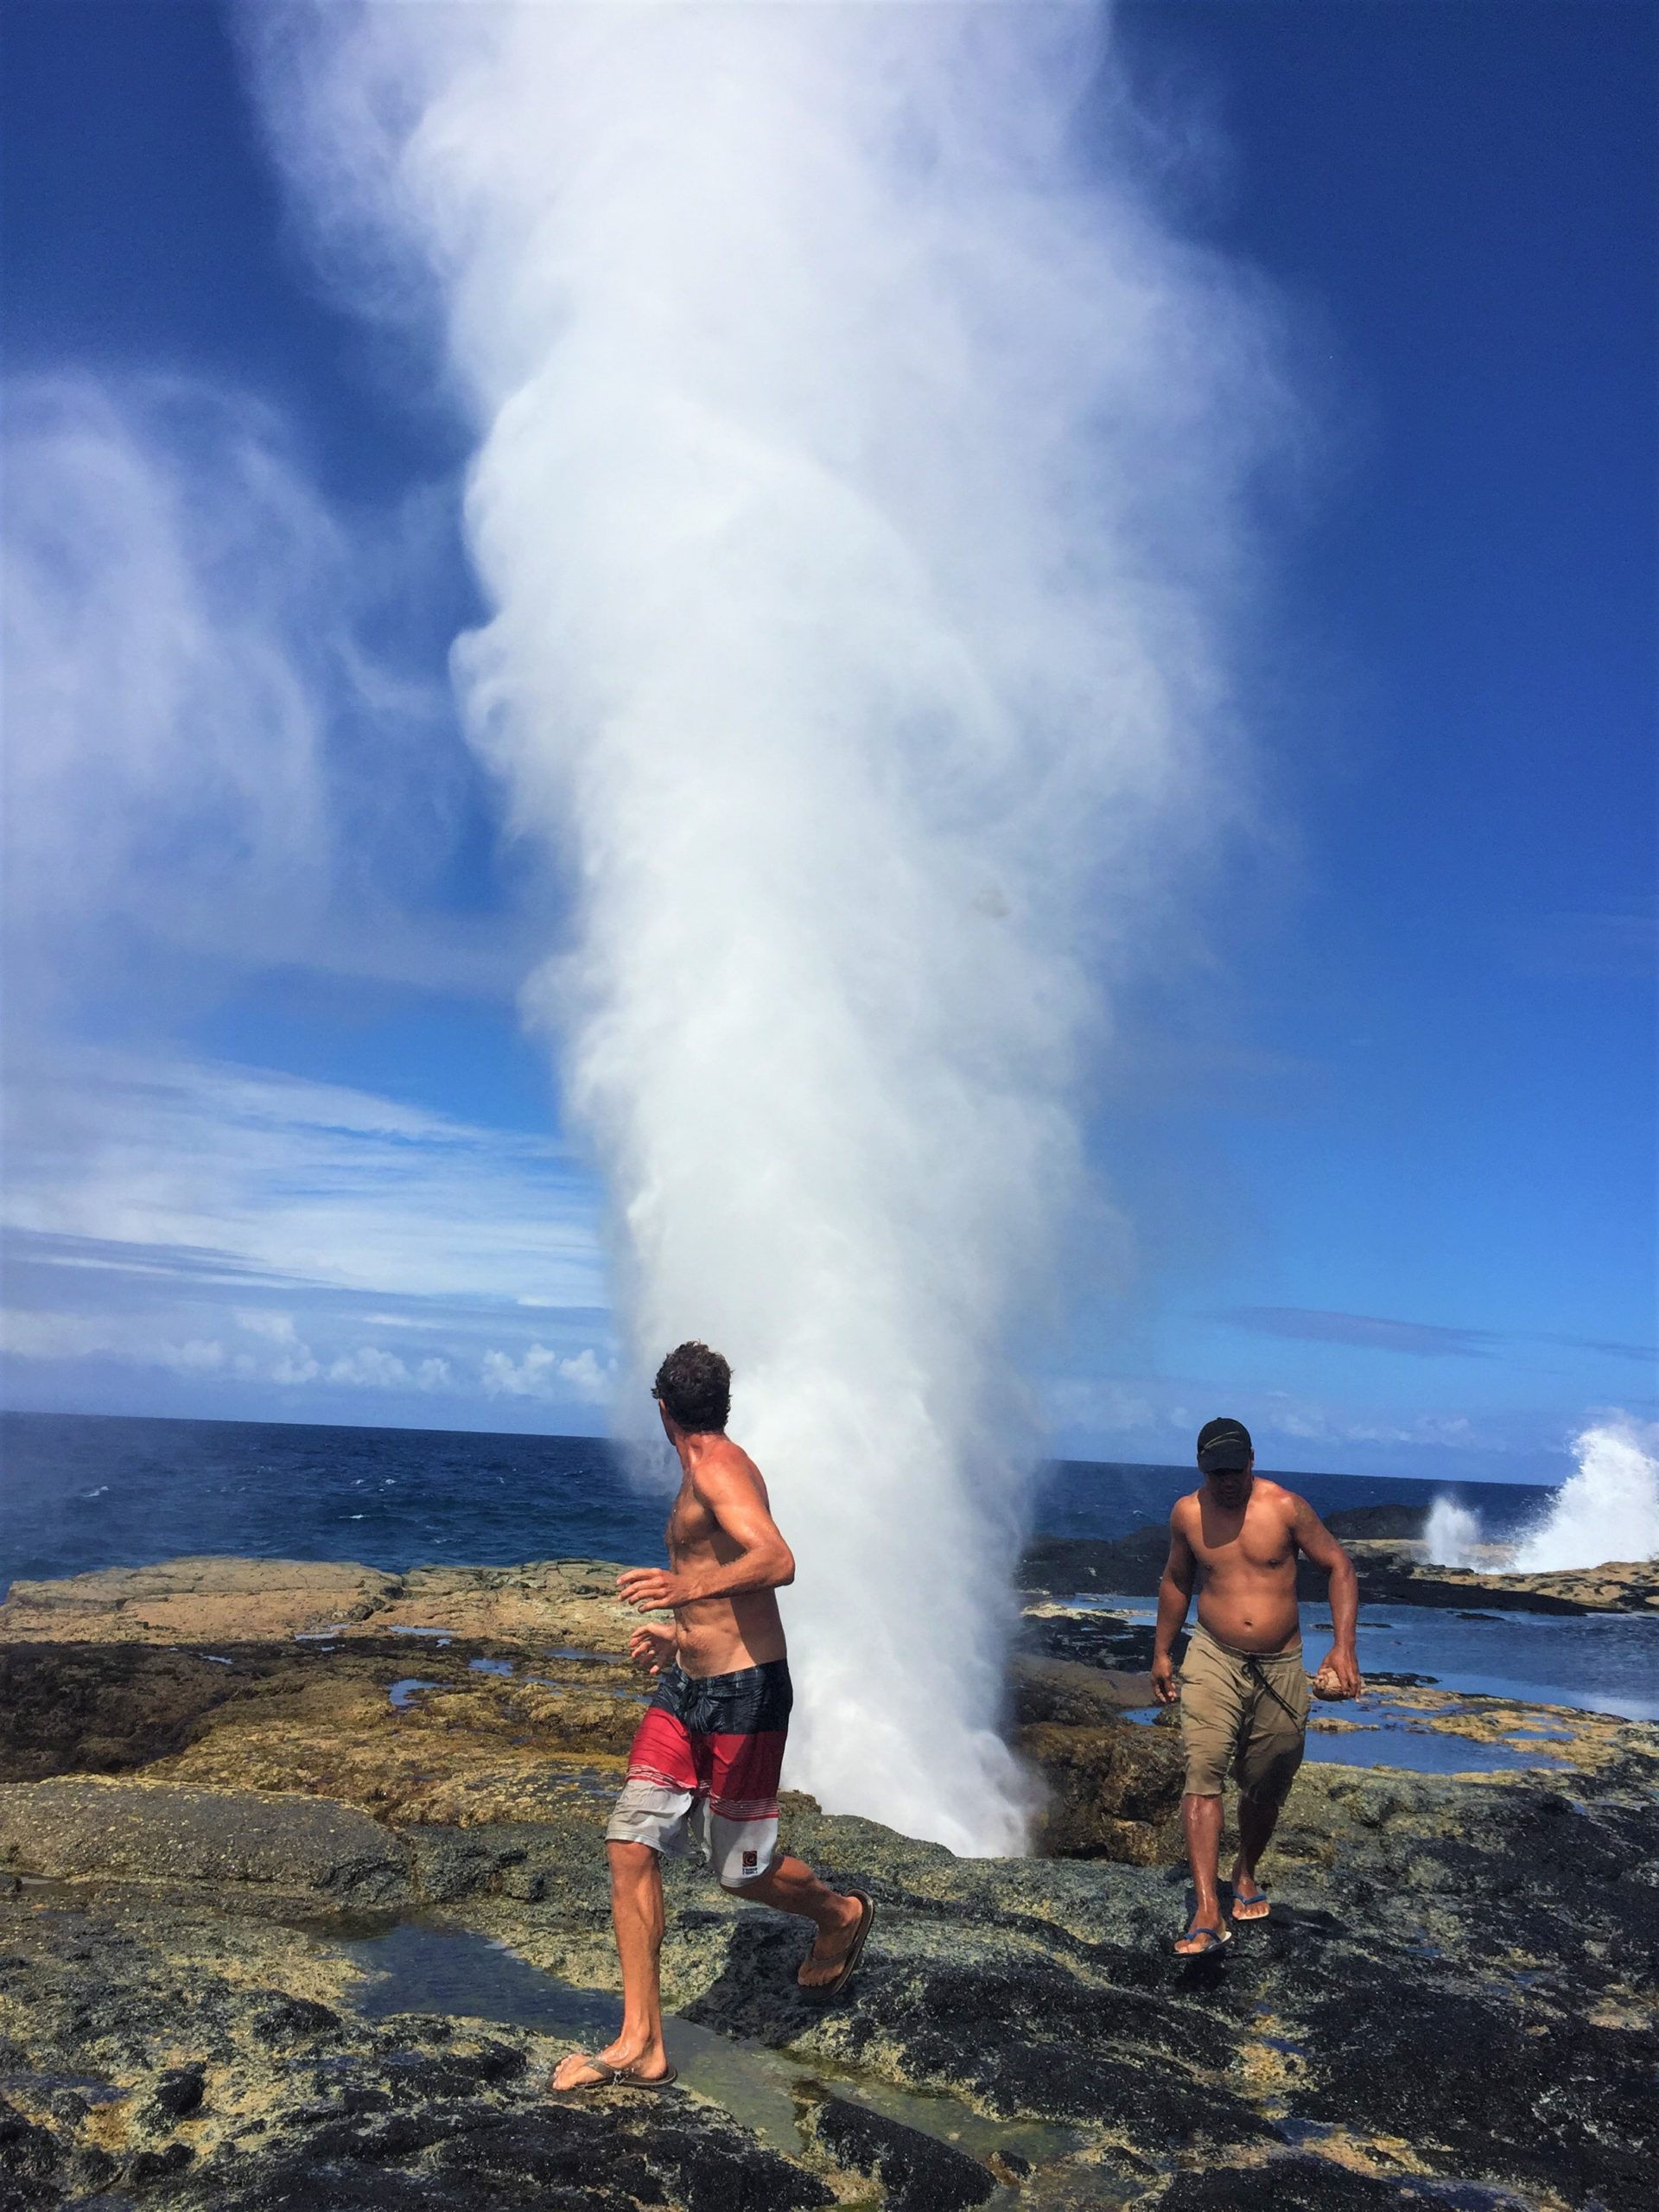 Run! Those blowholes are loud and wet!